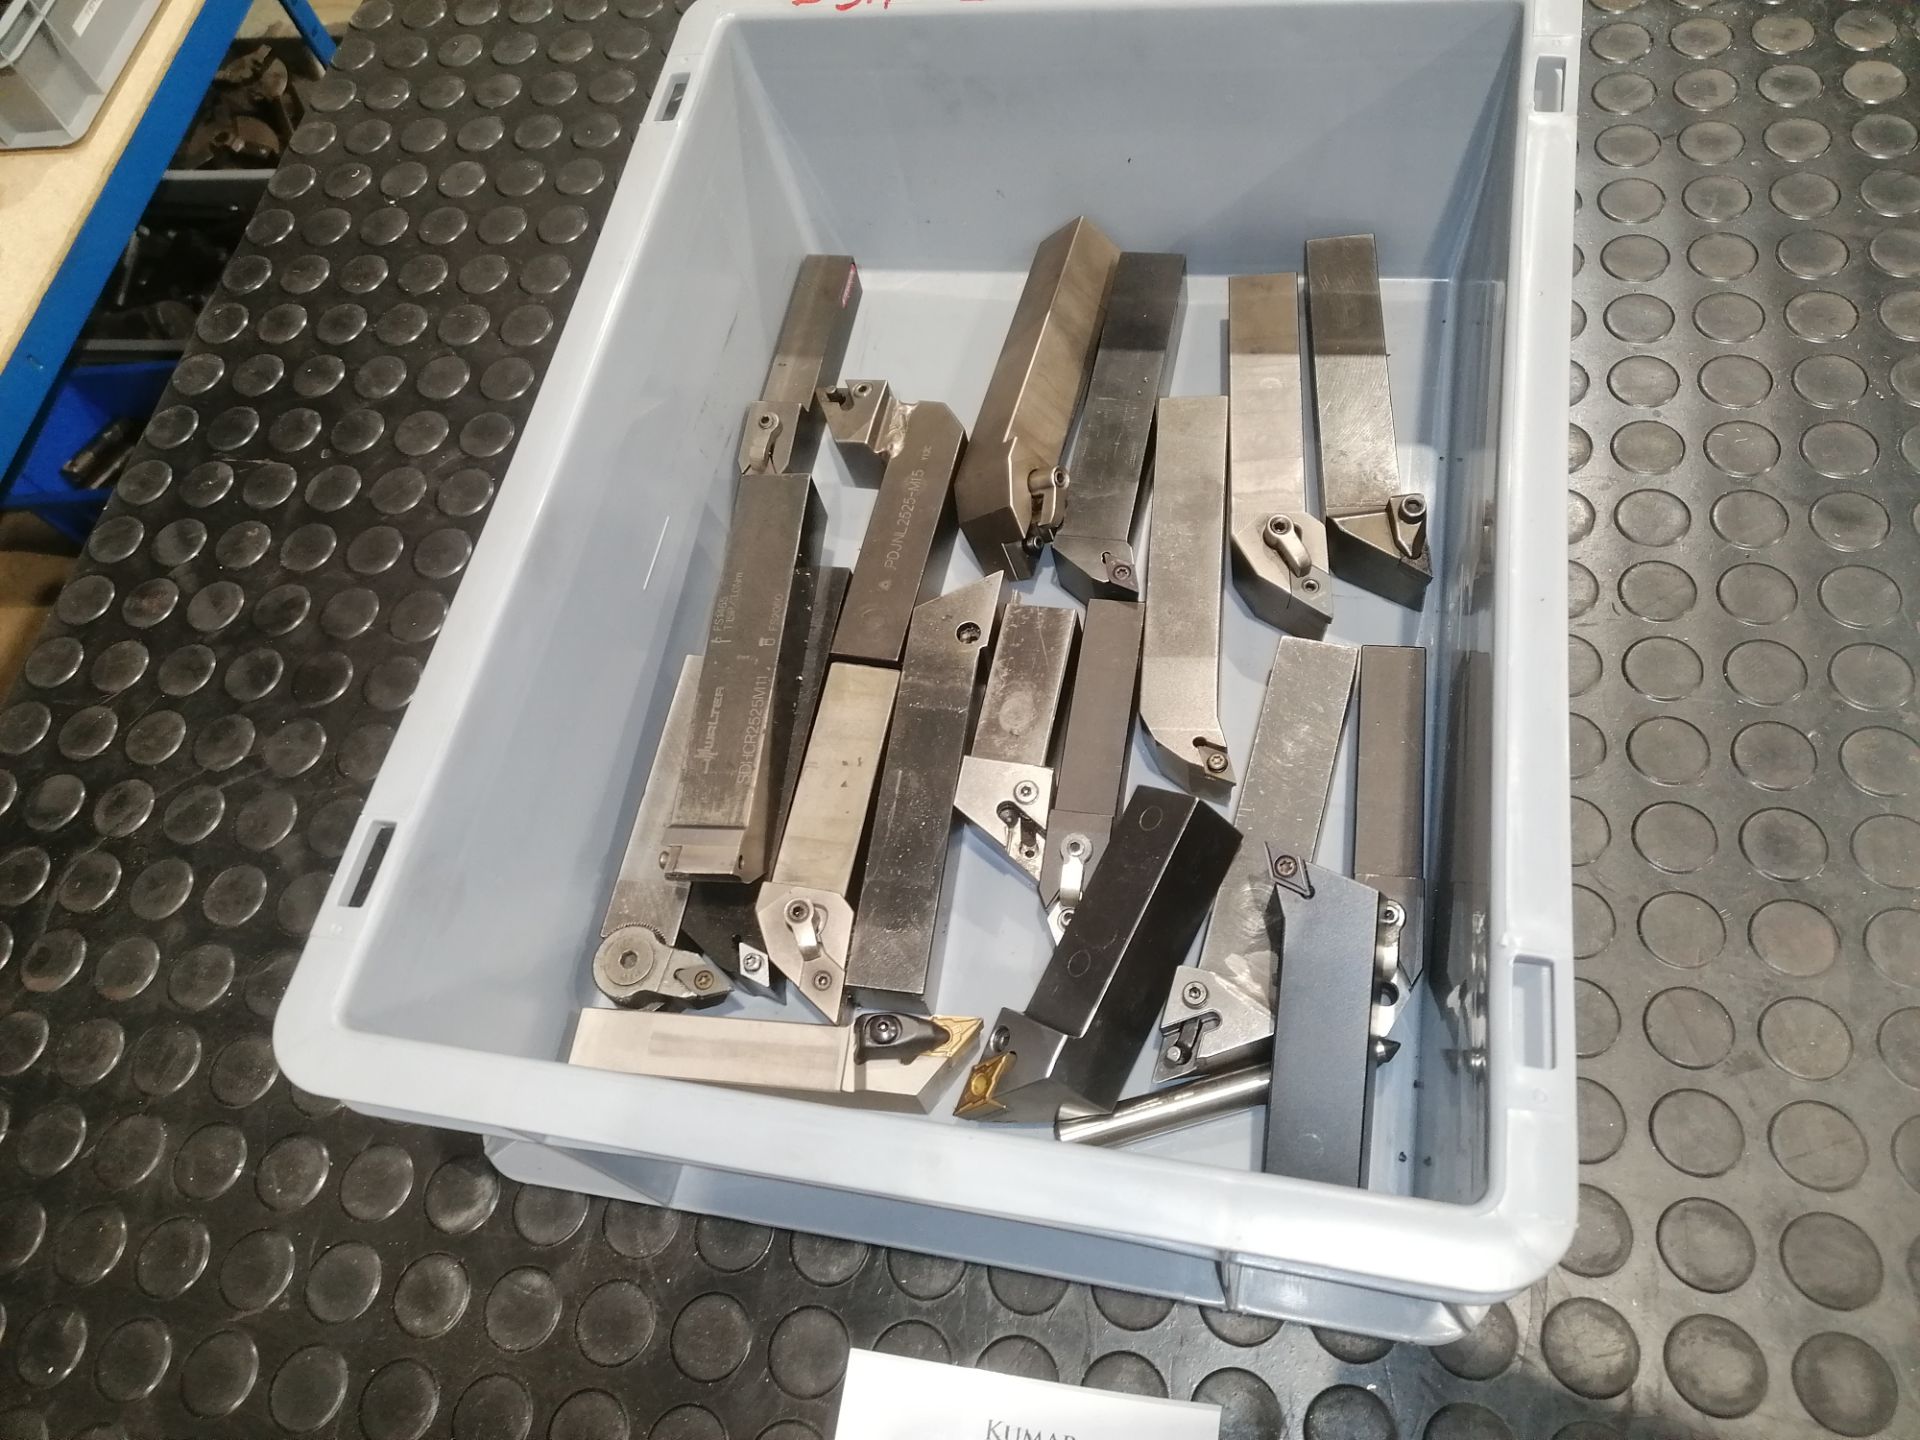 D Style Tooling Tools (Various Sizes) (Please Note: Plastic Container Boxes Are Not Included) - Image 4 of 4